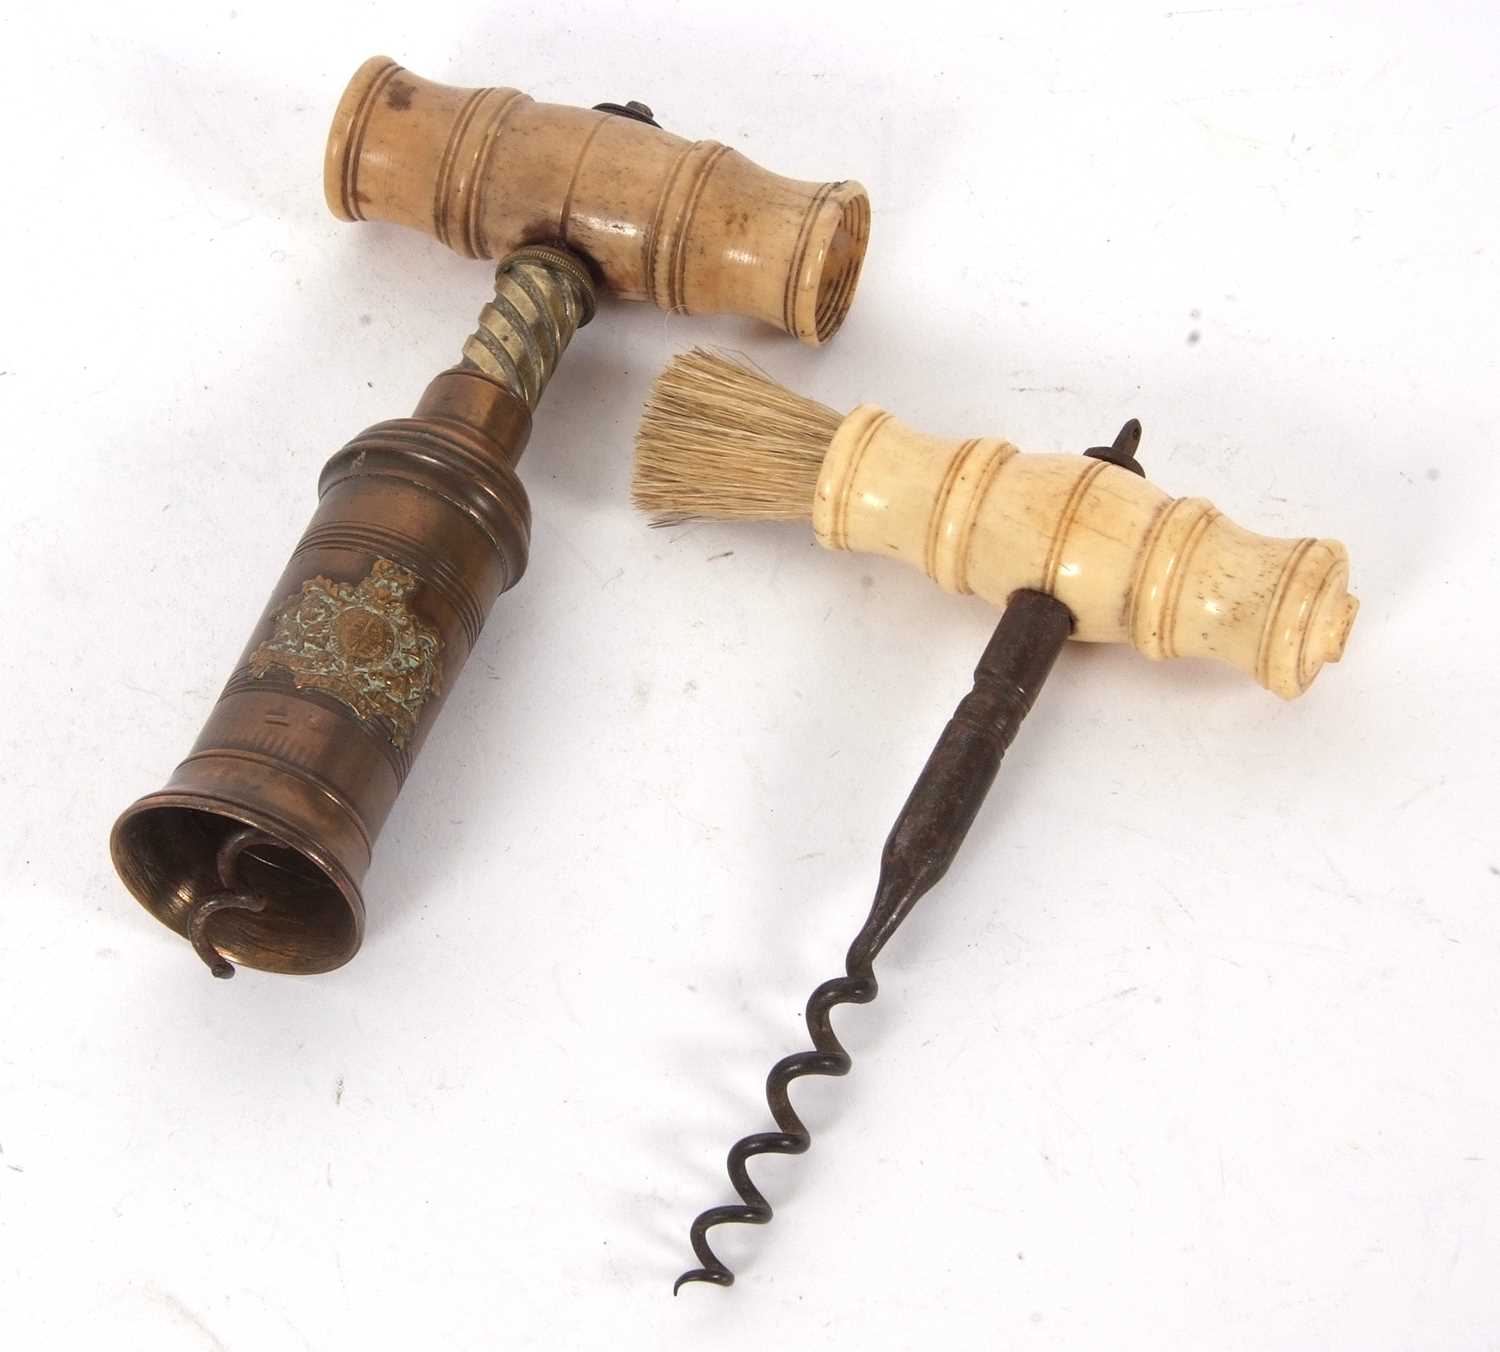 Mixed Lot: A Thomason type brass barrel corkscrew applied with a royal coat of arms, turned bone